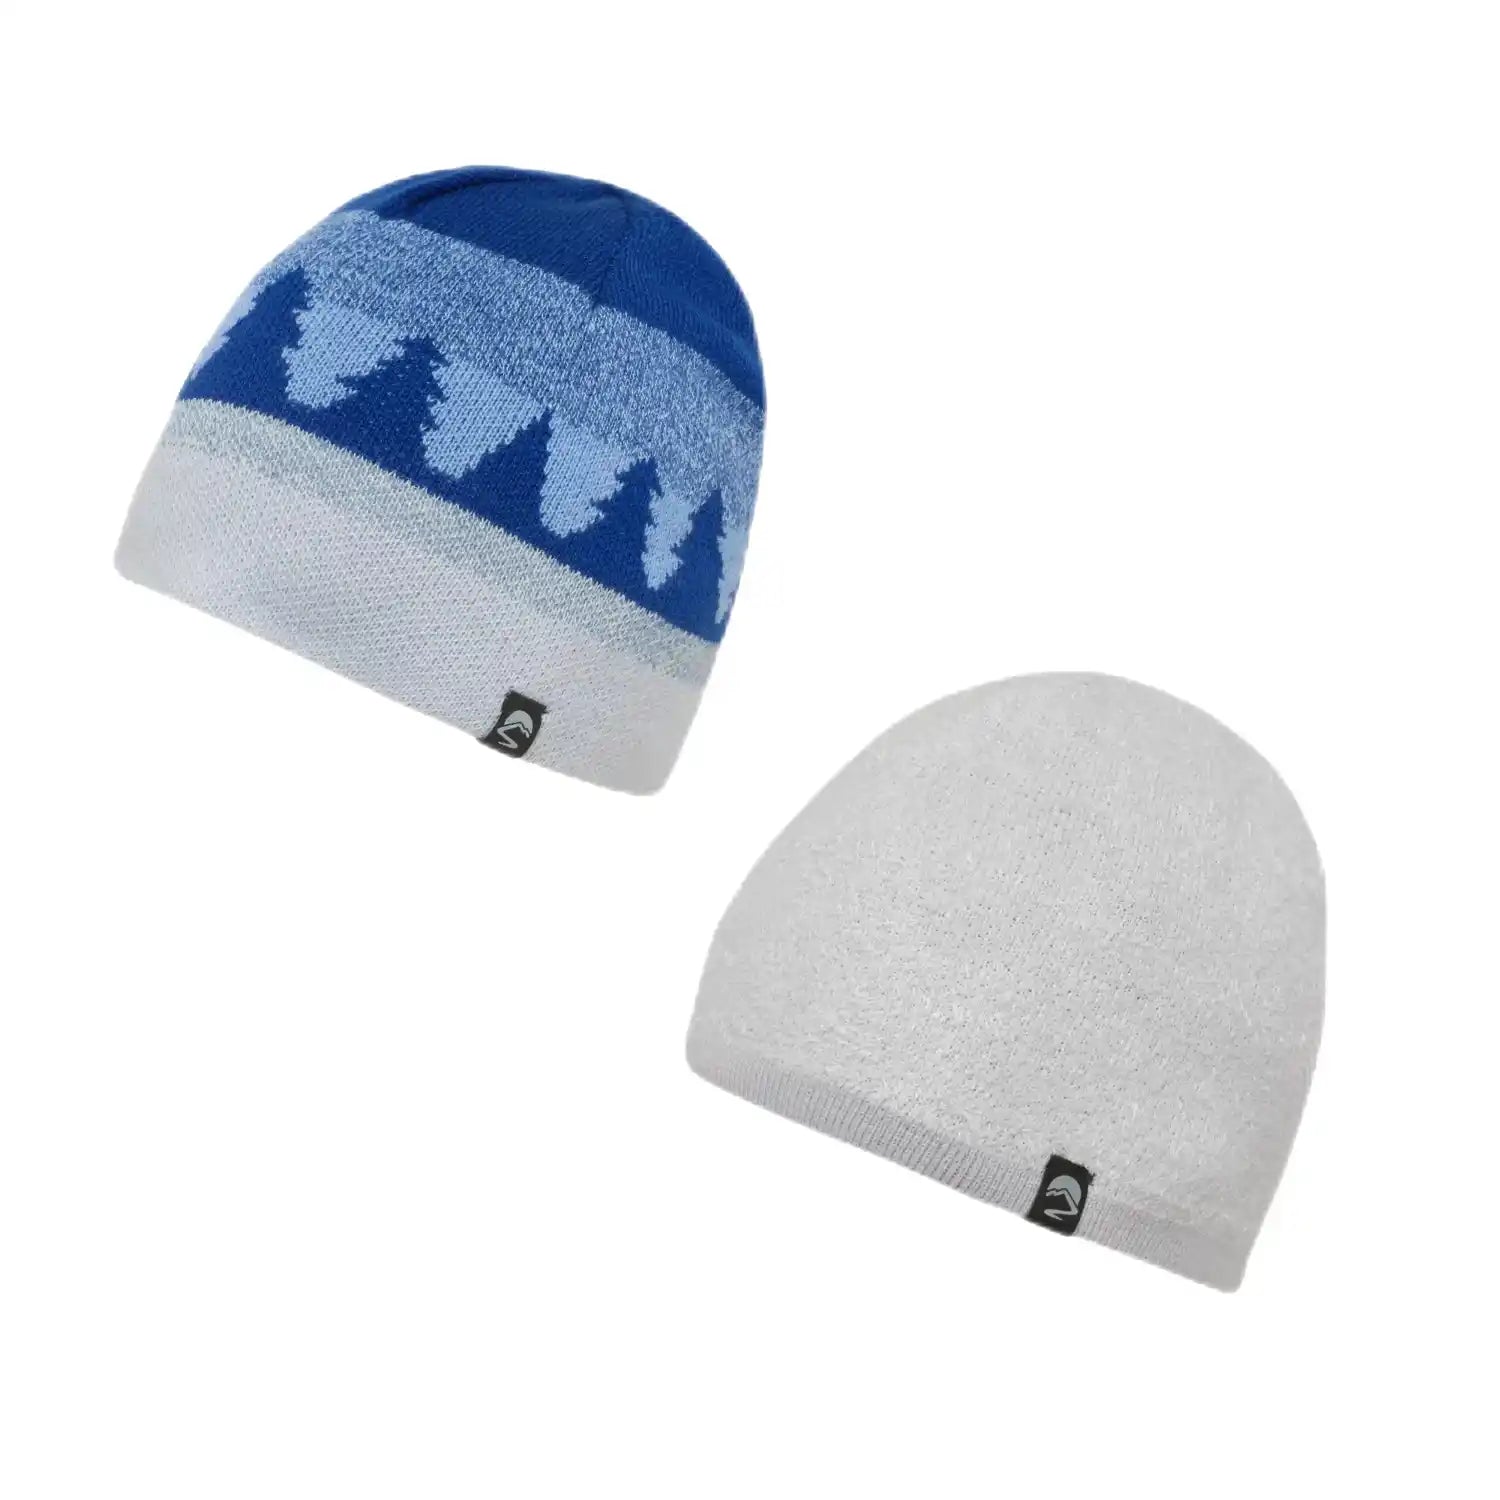 Sunday Afternoon K's Graphic Series Beanie, Winterland Fox, reversible view 